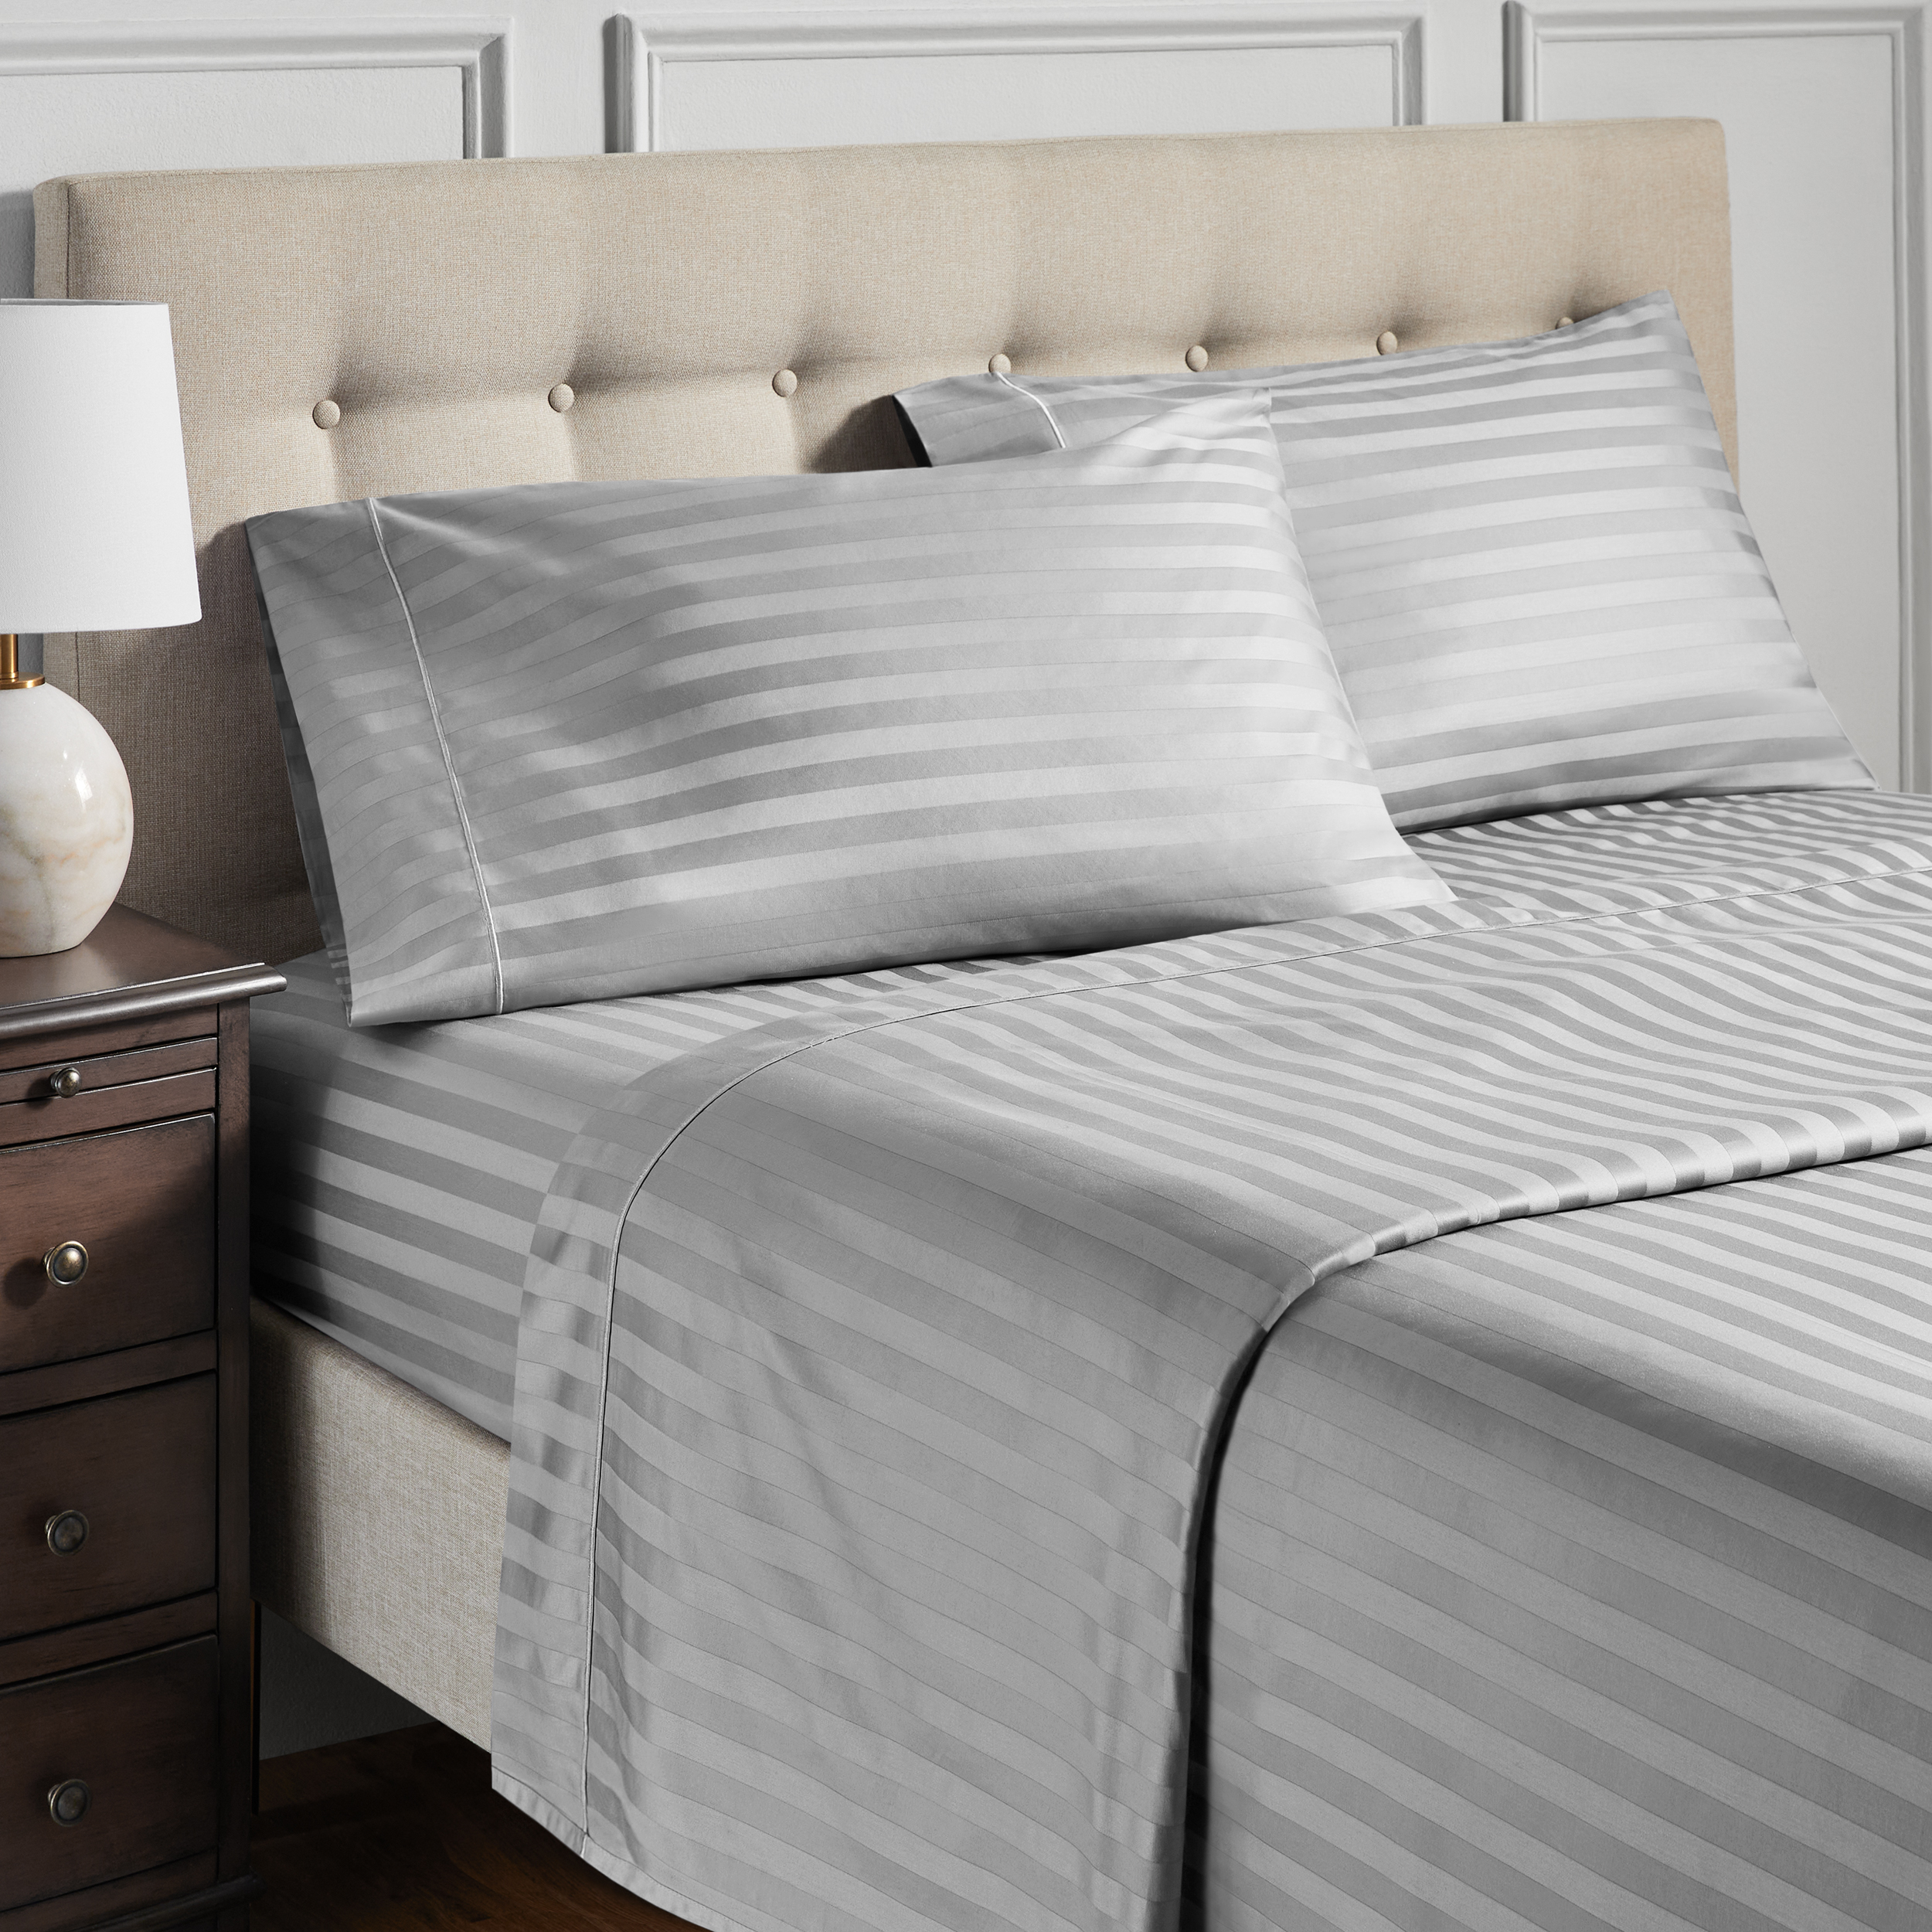 Hotel Style 4-Piece 600 Thread Count Grey Stripe Egyptian Cotton Bed Sheet Set, King - Deep Pocket - image 3 of 10